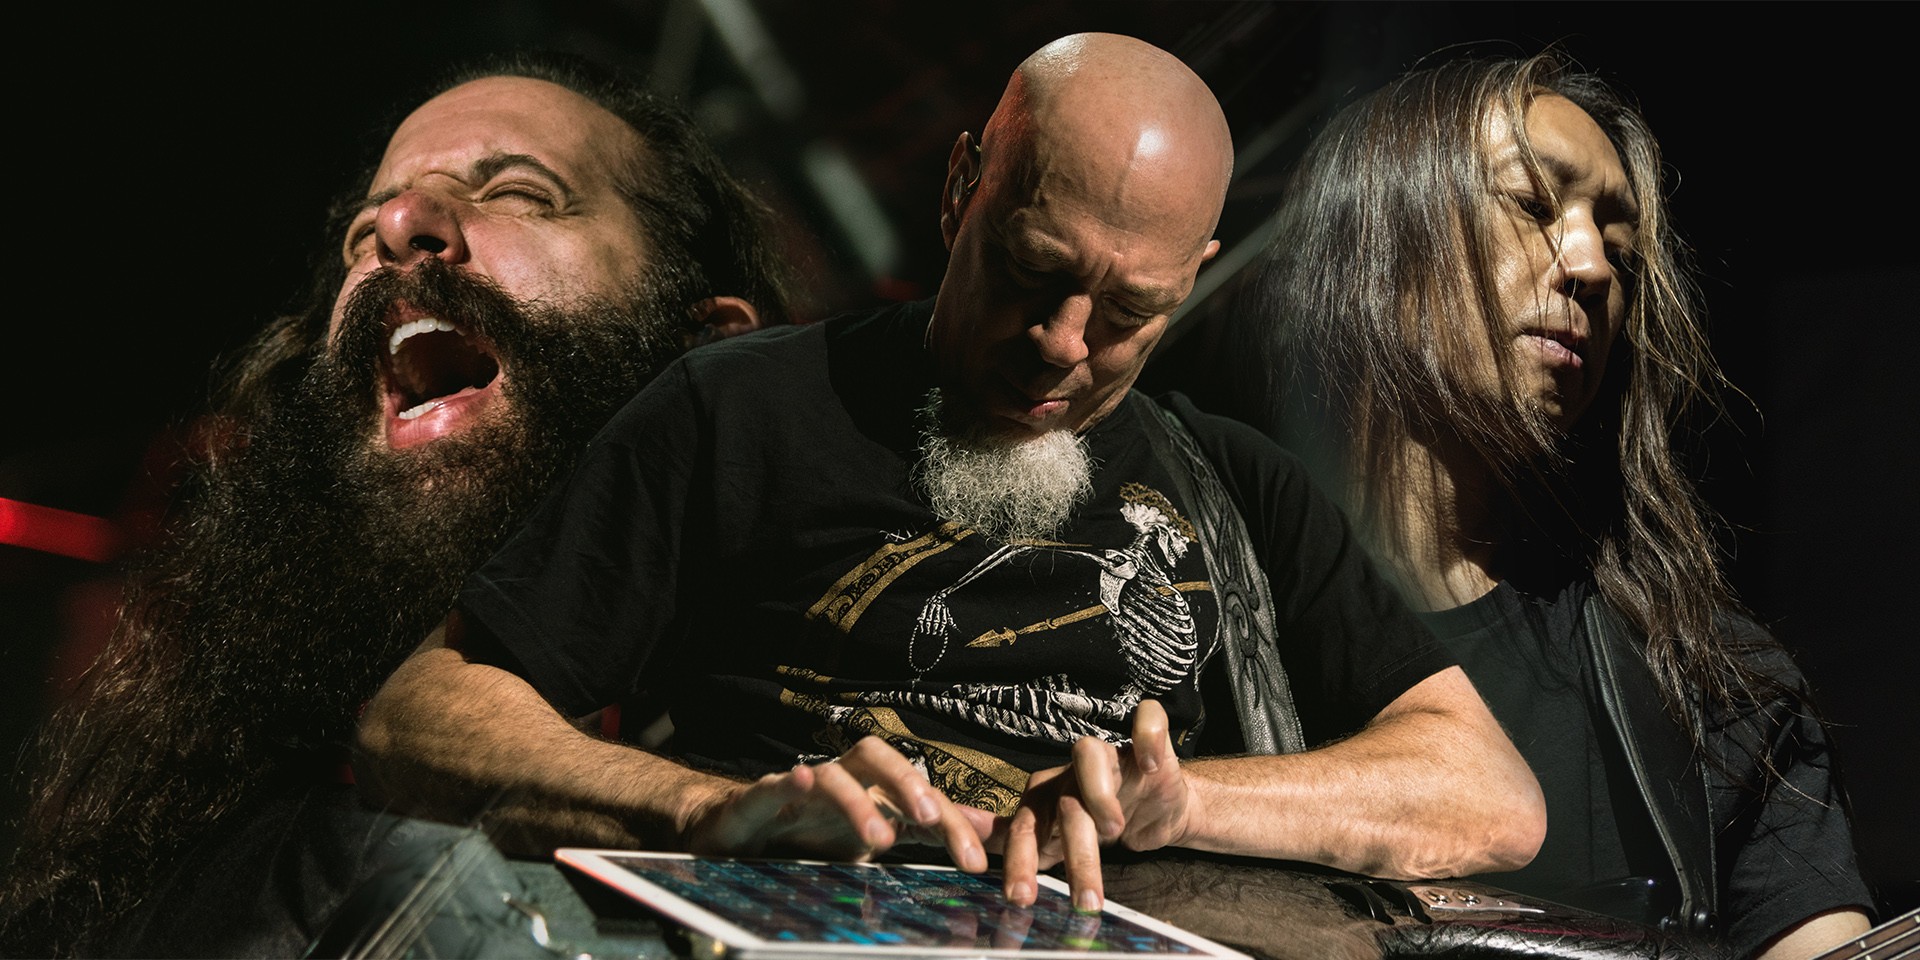 Dream Theater, up close at their grandest Singapore show yet — photo gallery